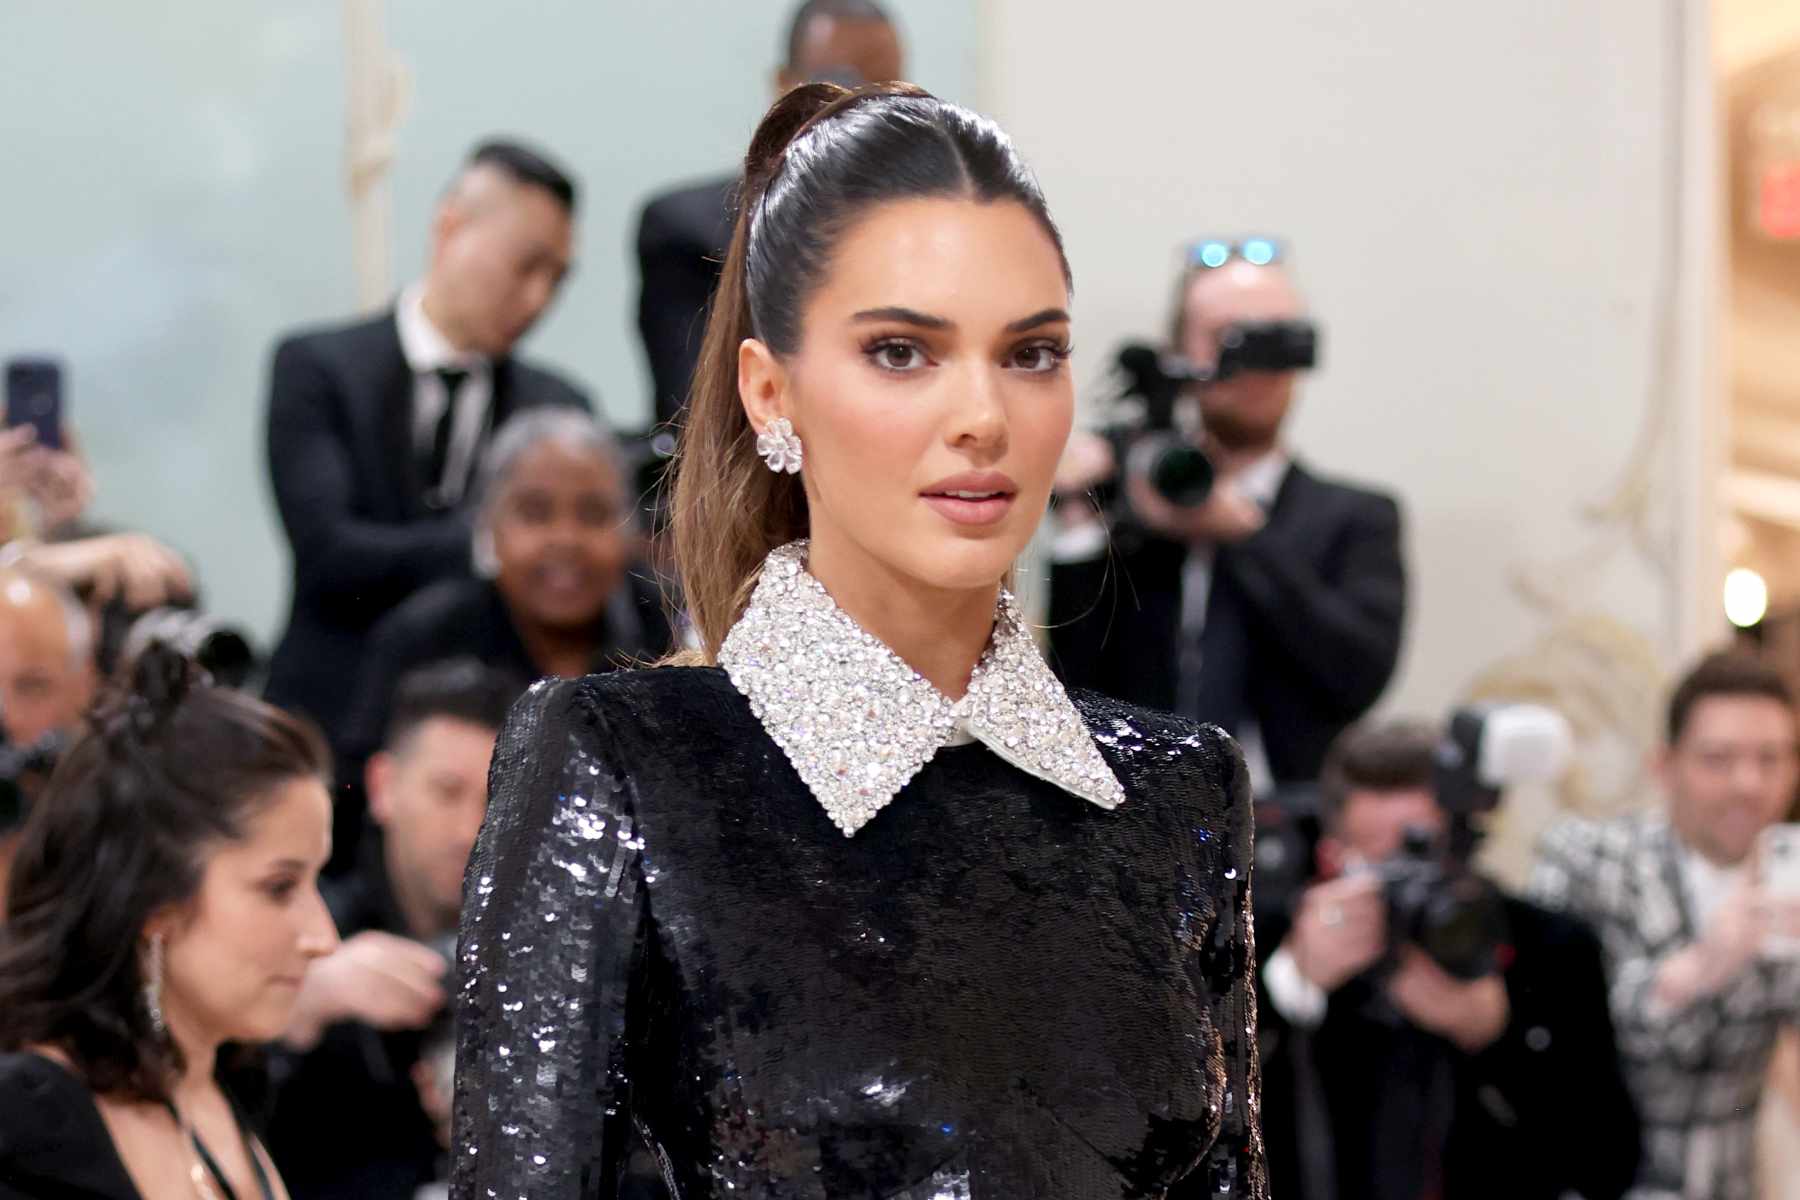 Met Gala 2023's Worst Outfits: Kendall Jenner, Sydney Sweeney